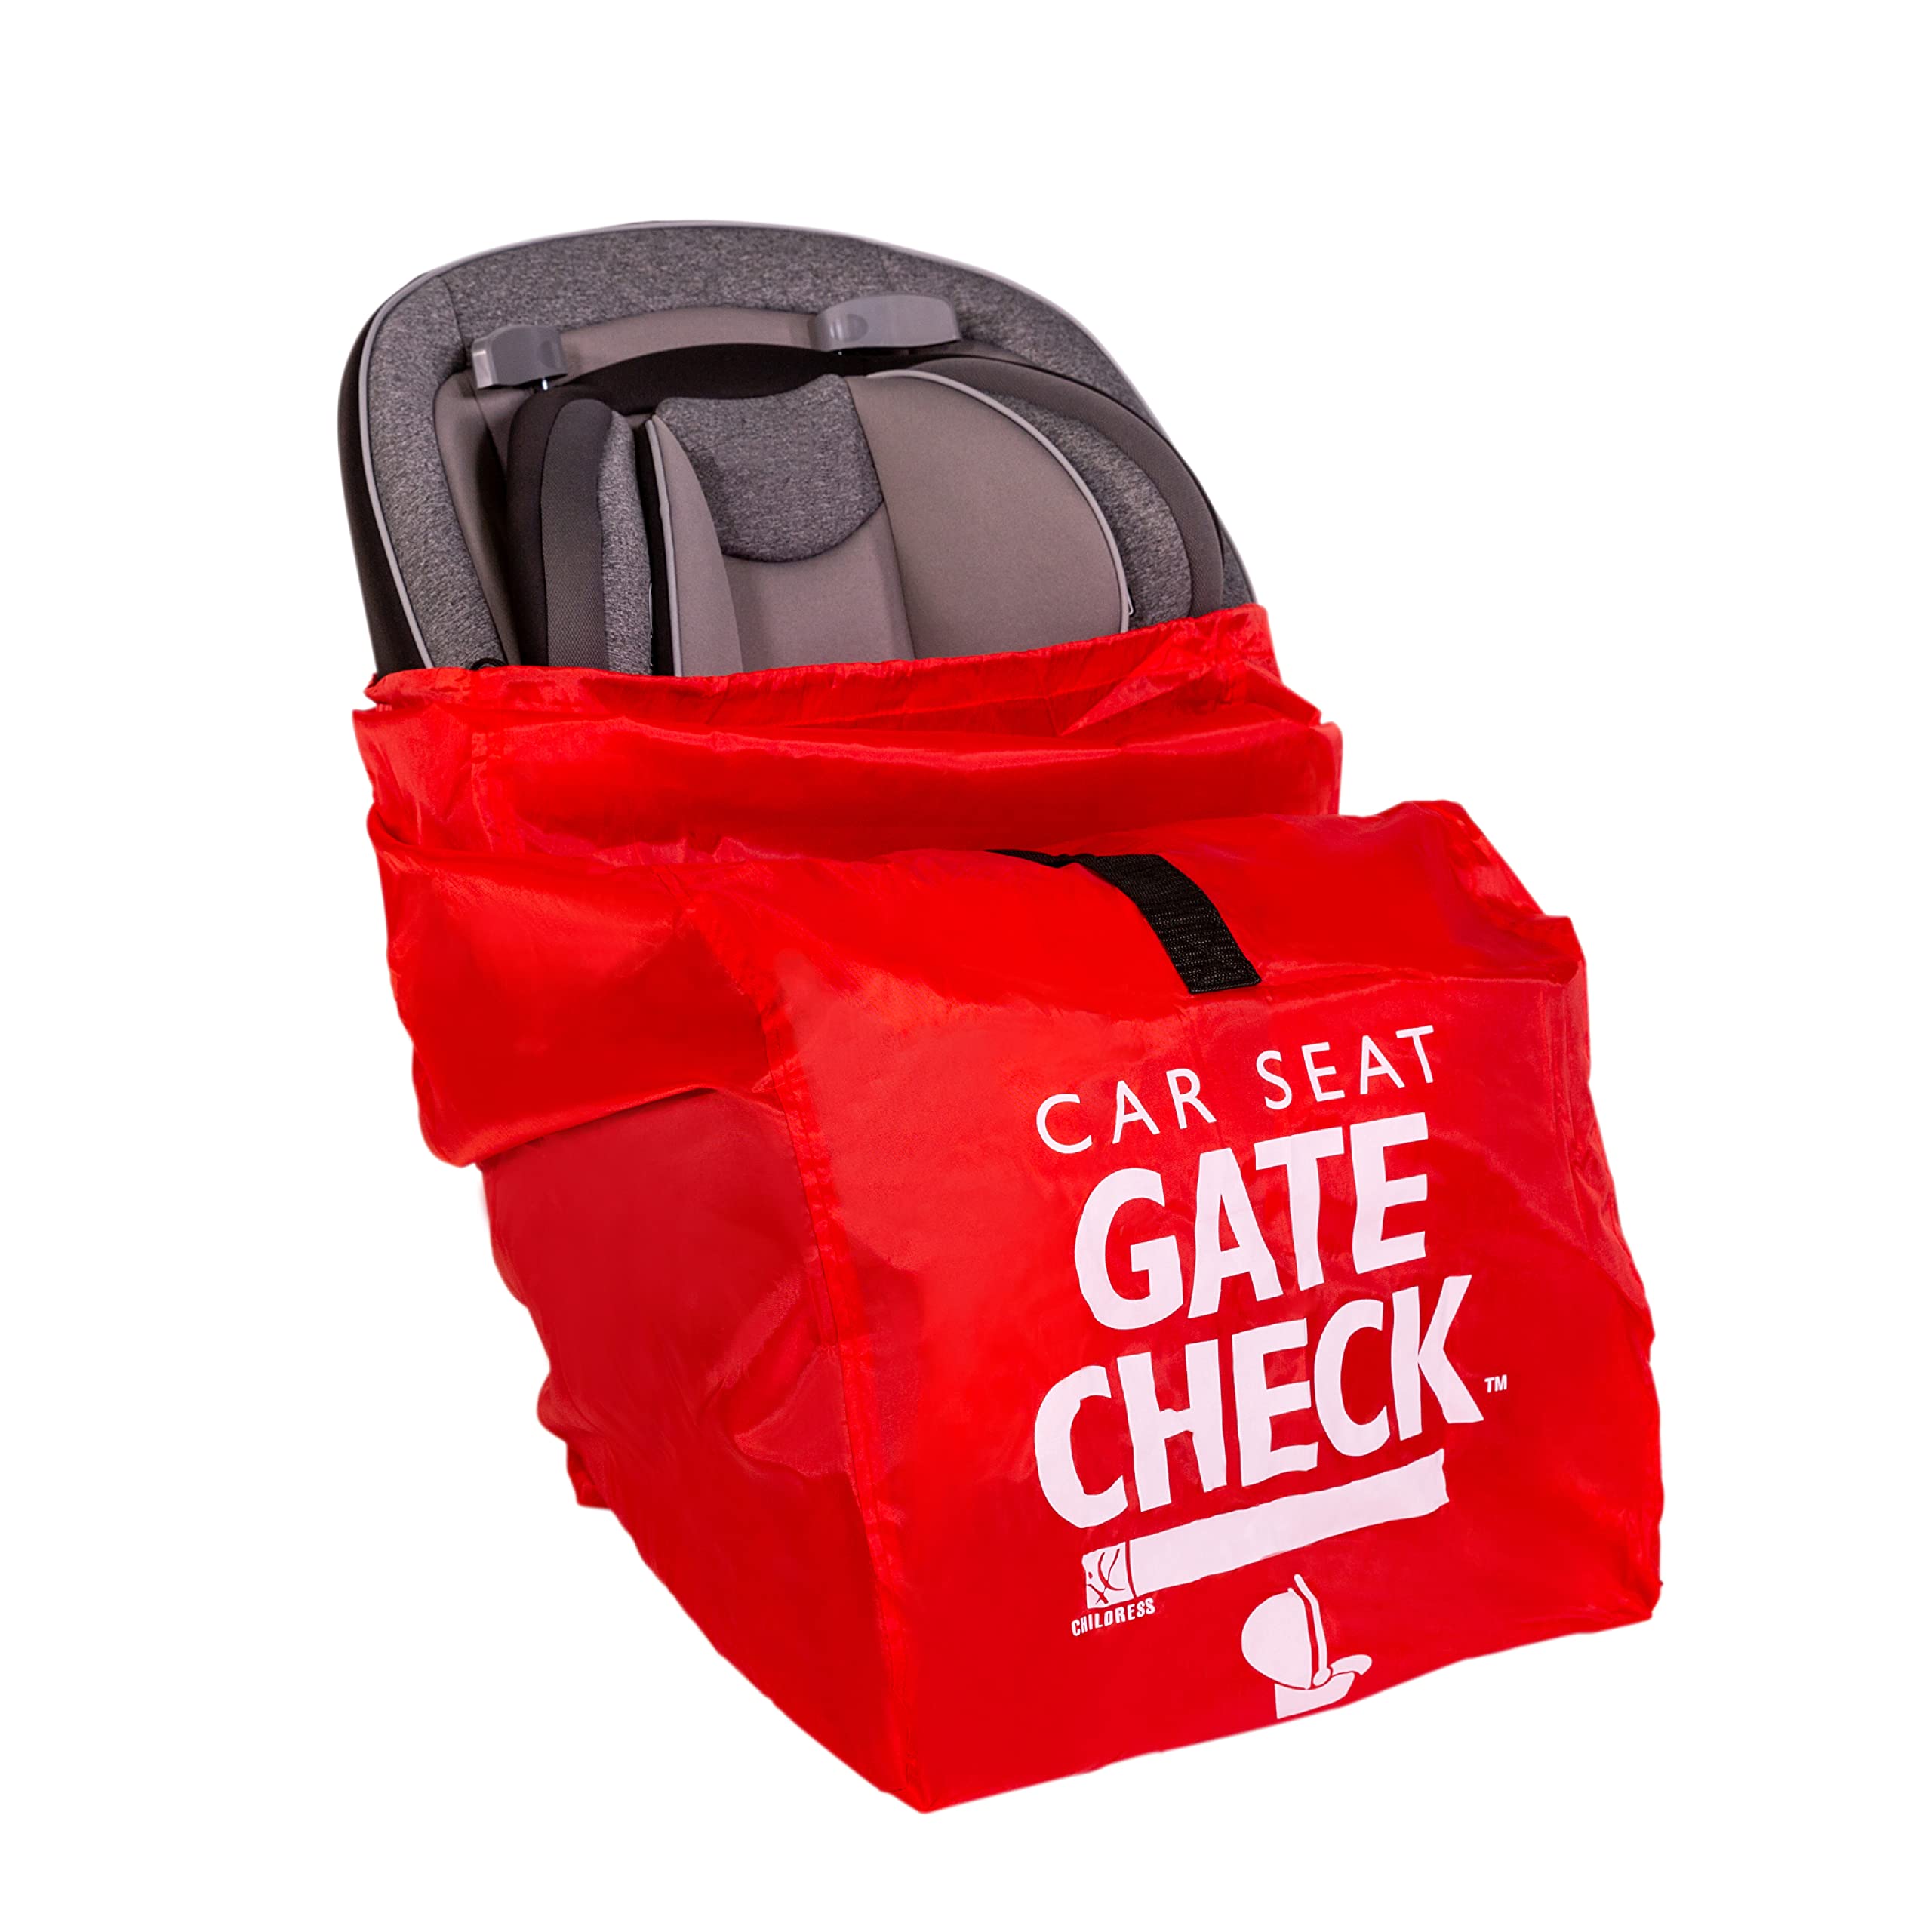 How to Check a Car Seat Put in Trash Bags